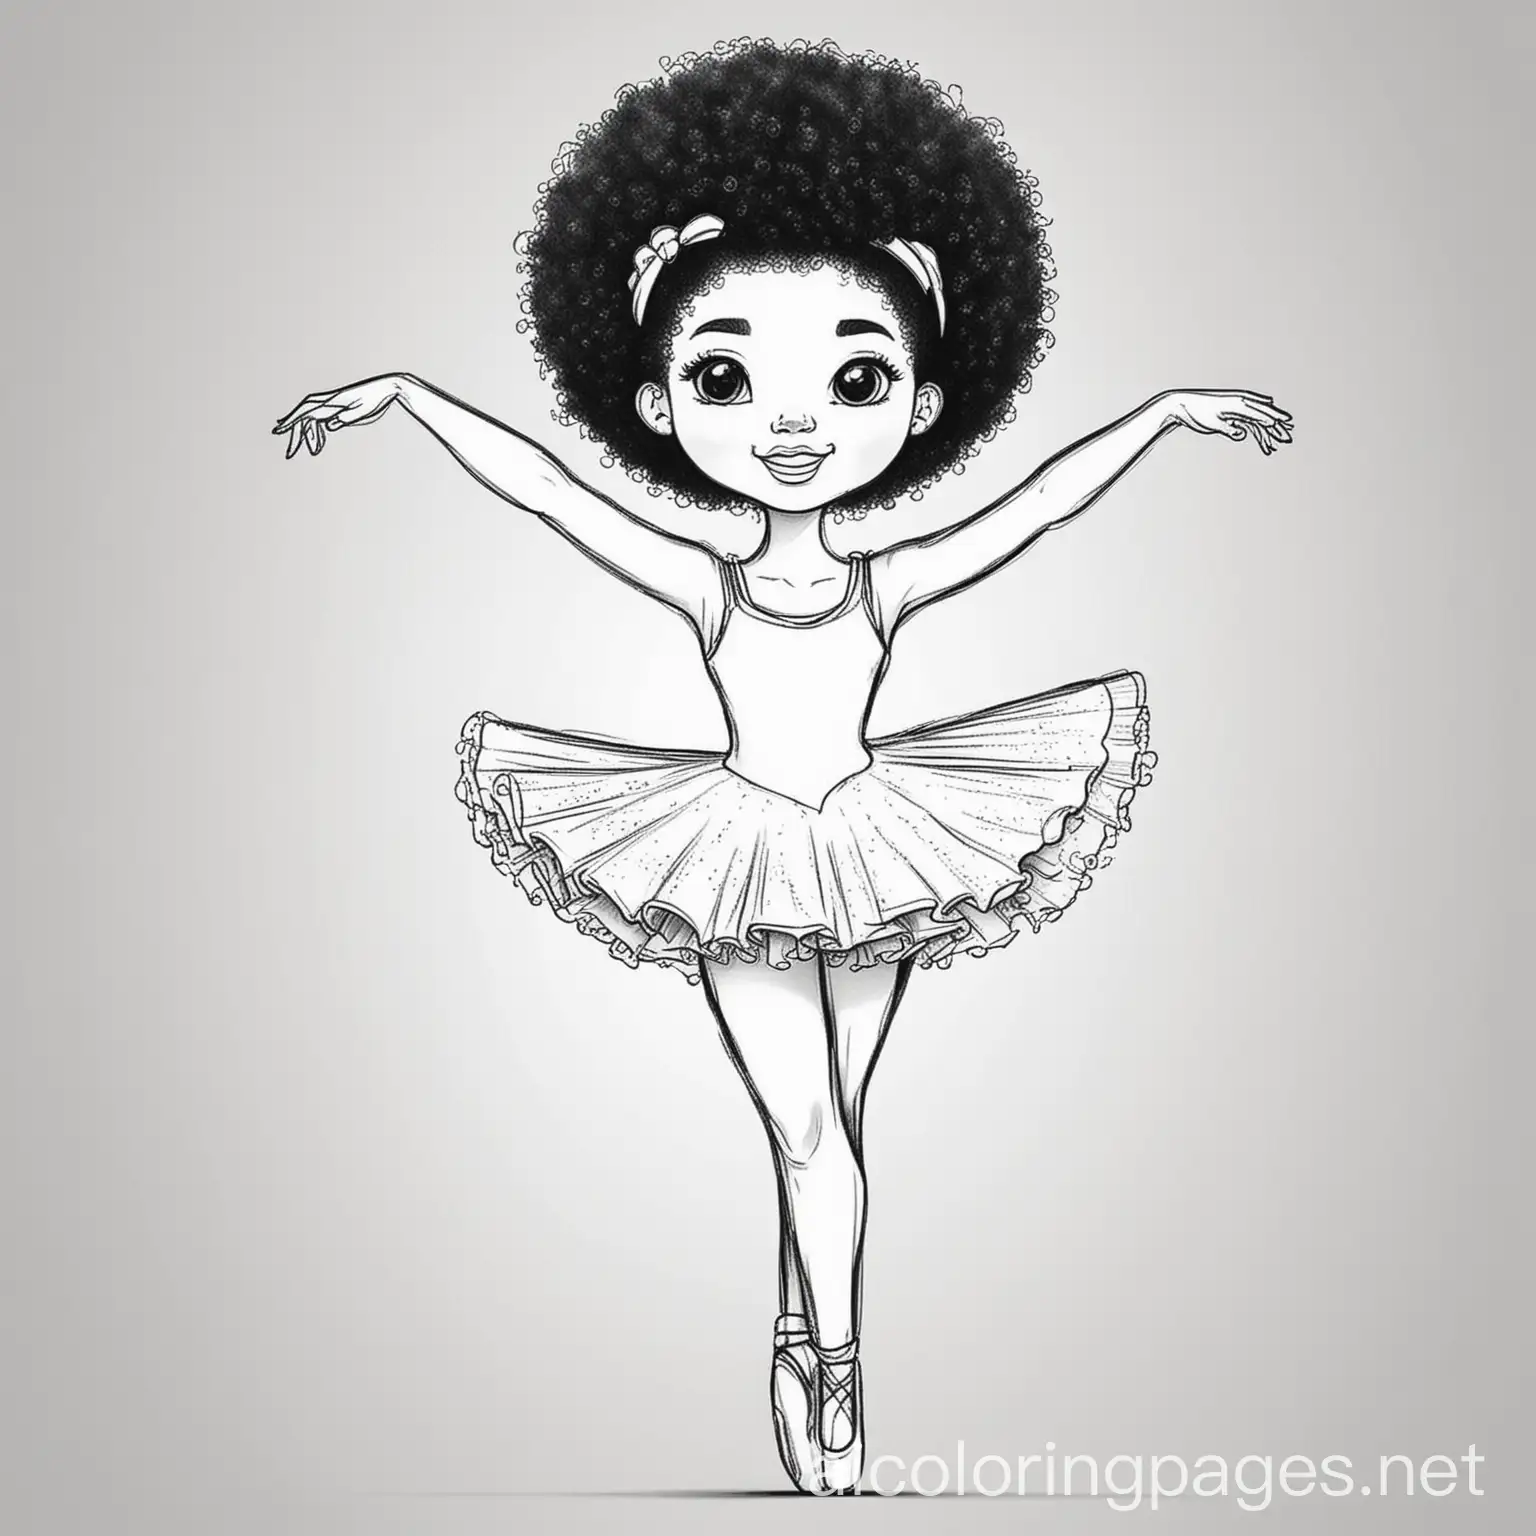 ballerina with an afro dancing, Coloring Page, black and white, line art, white background, Simplicity, Ample White Space. The background of the coloring page is plain white to make it easy for young children to color within the lines. The outlines of all the subjects are easy to distinguish, making it simple for kids to color without too much difficulty